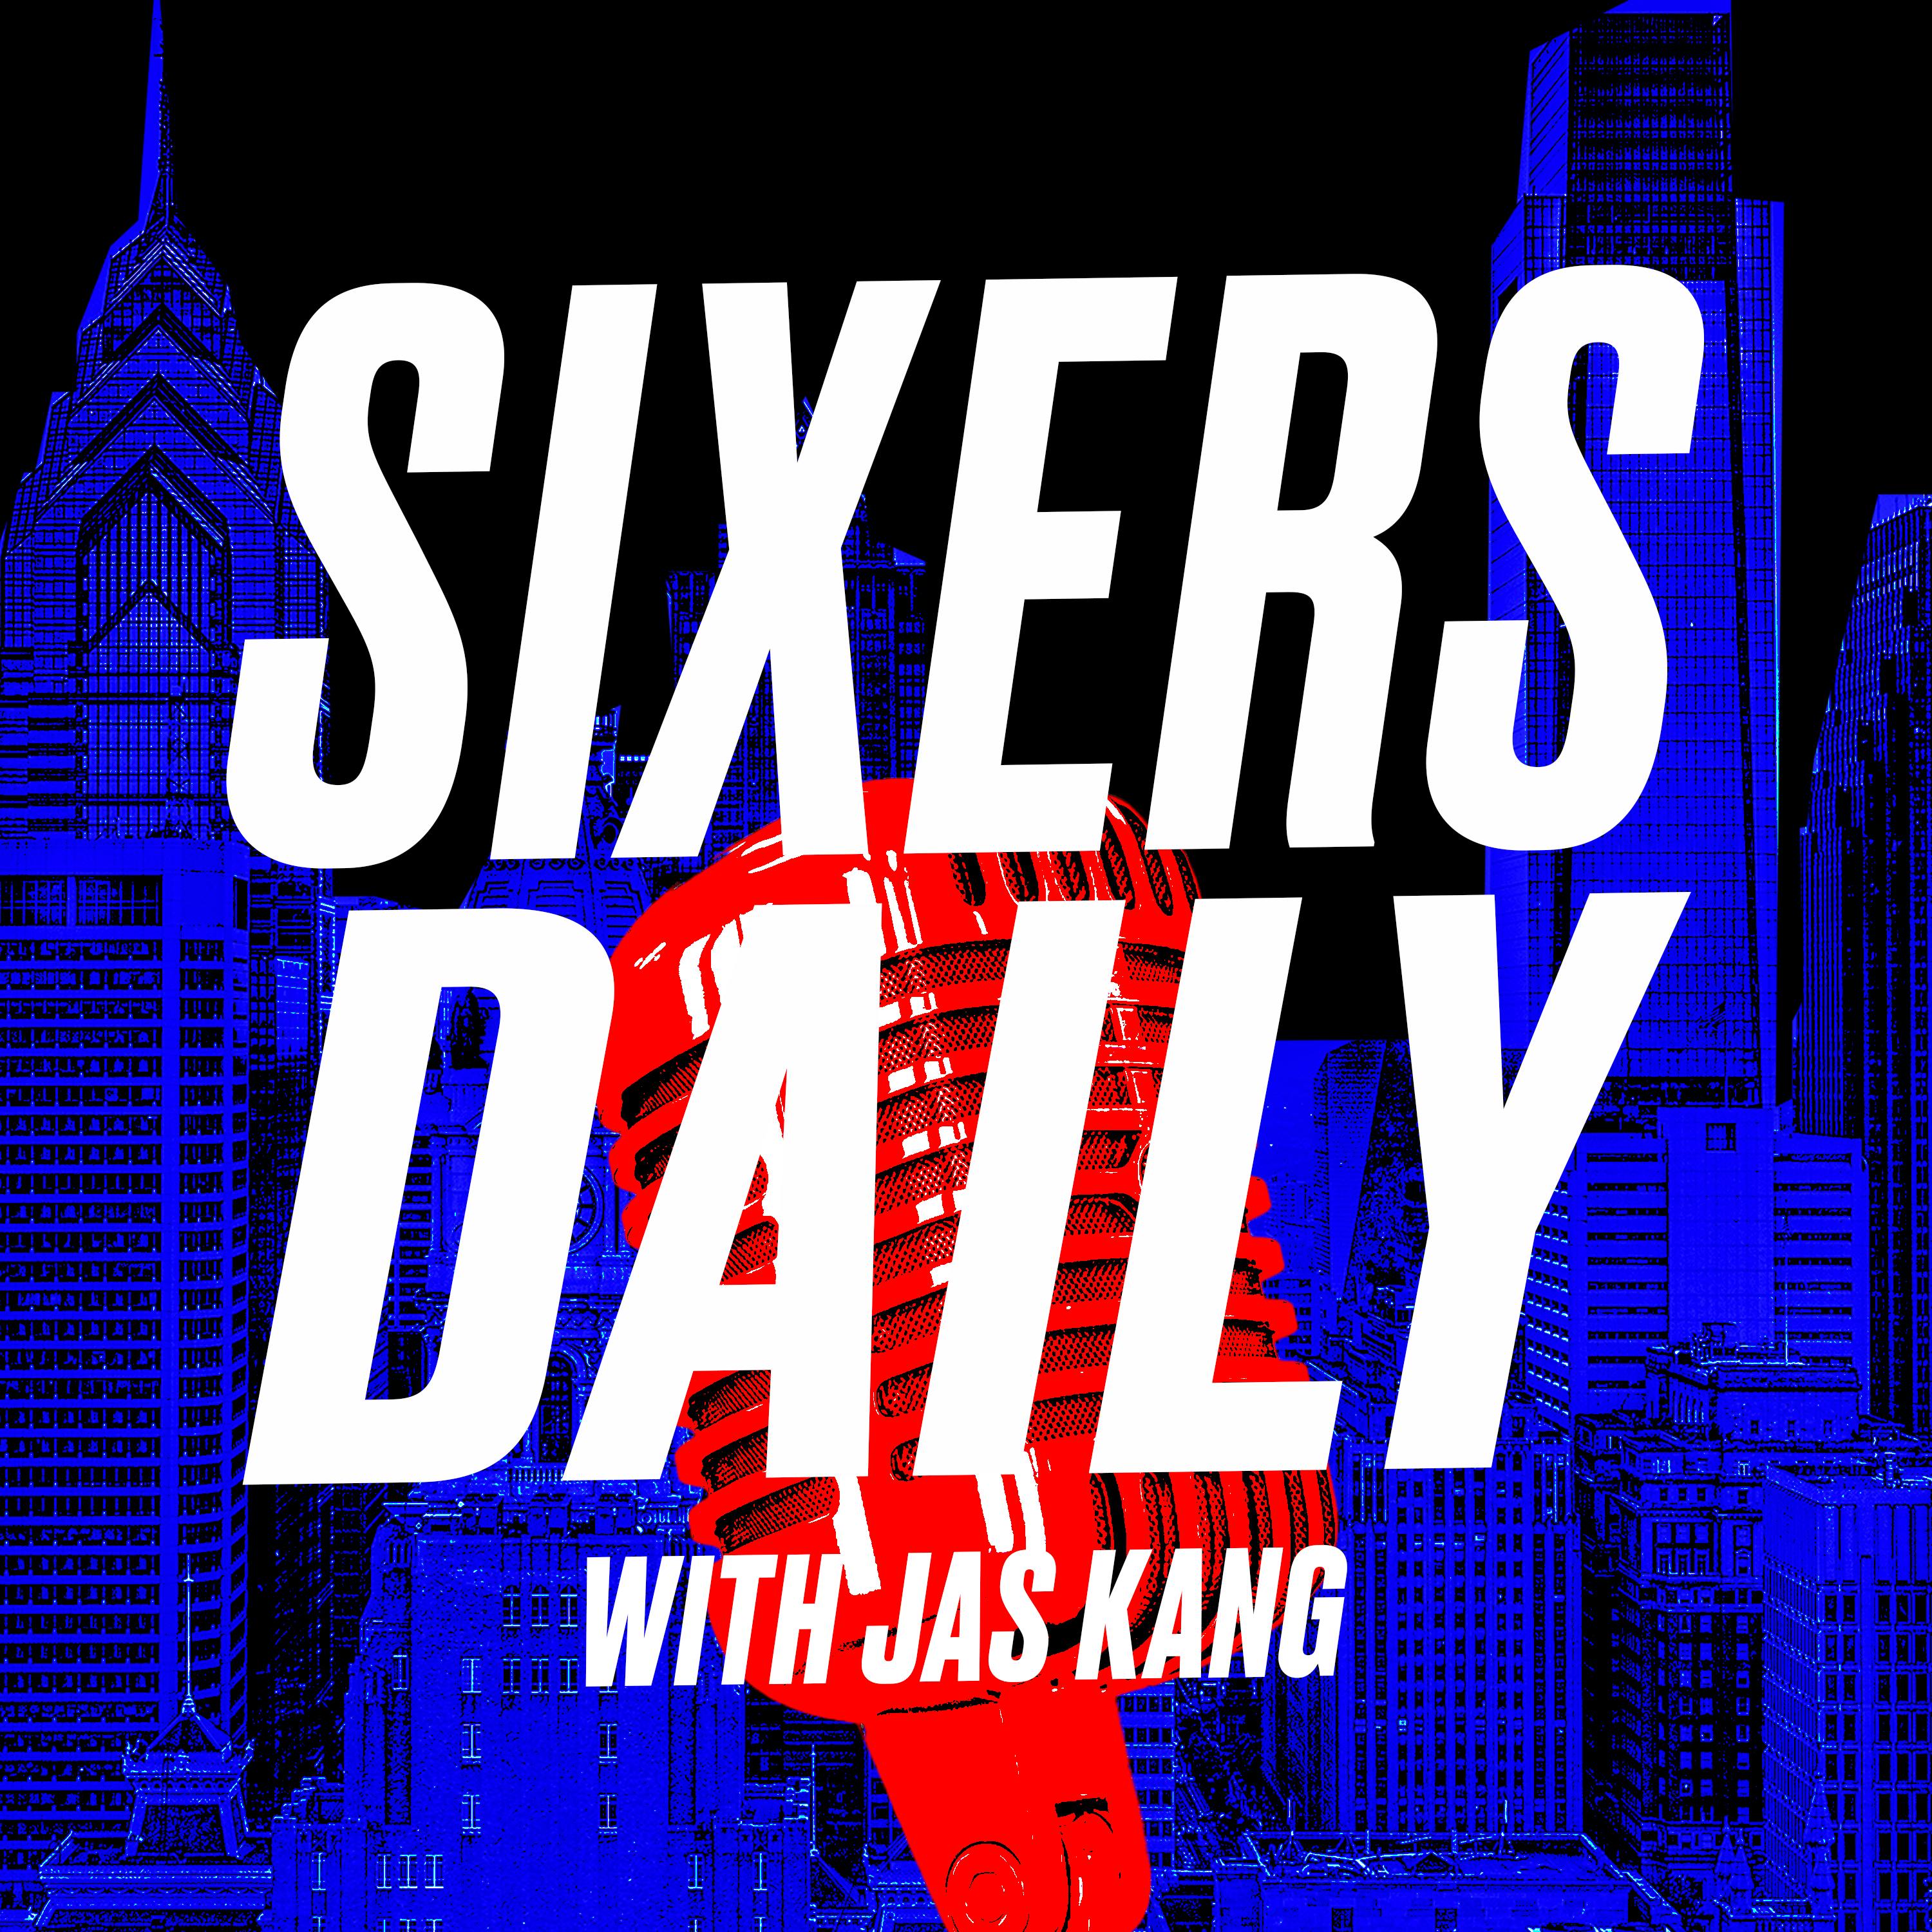 Sixers Daily with Jas Kang - Which veterans could Daryl Morey sign before the season? Plus, some Lakers and Donovan Mitchell talk. With Dave Early.